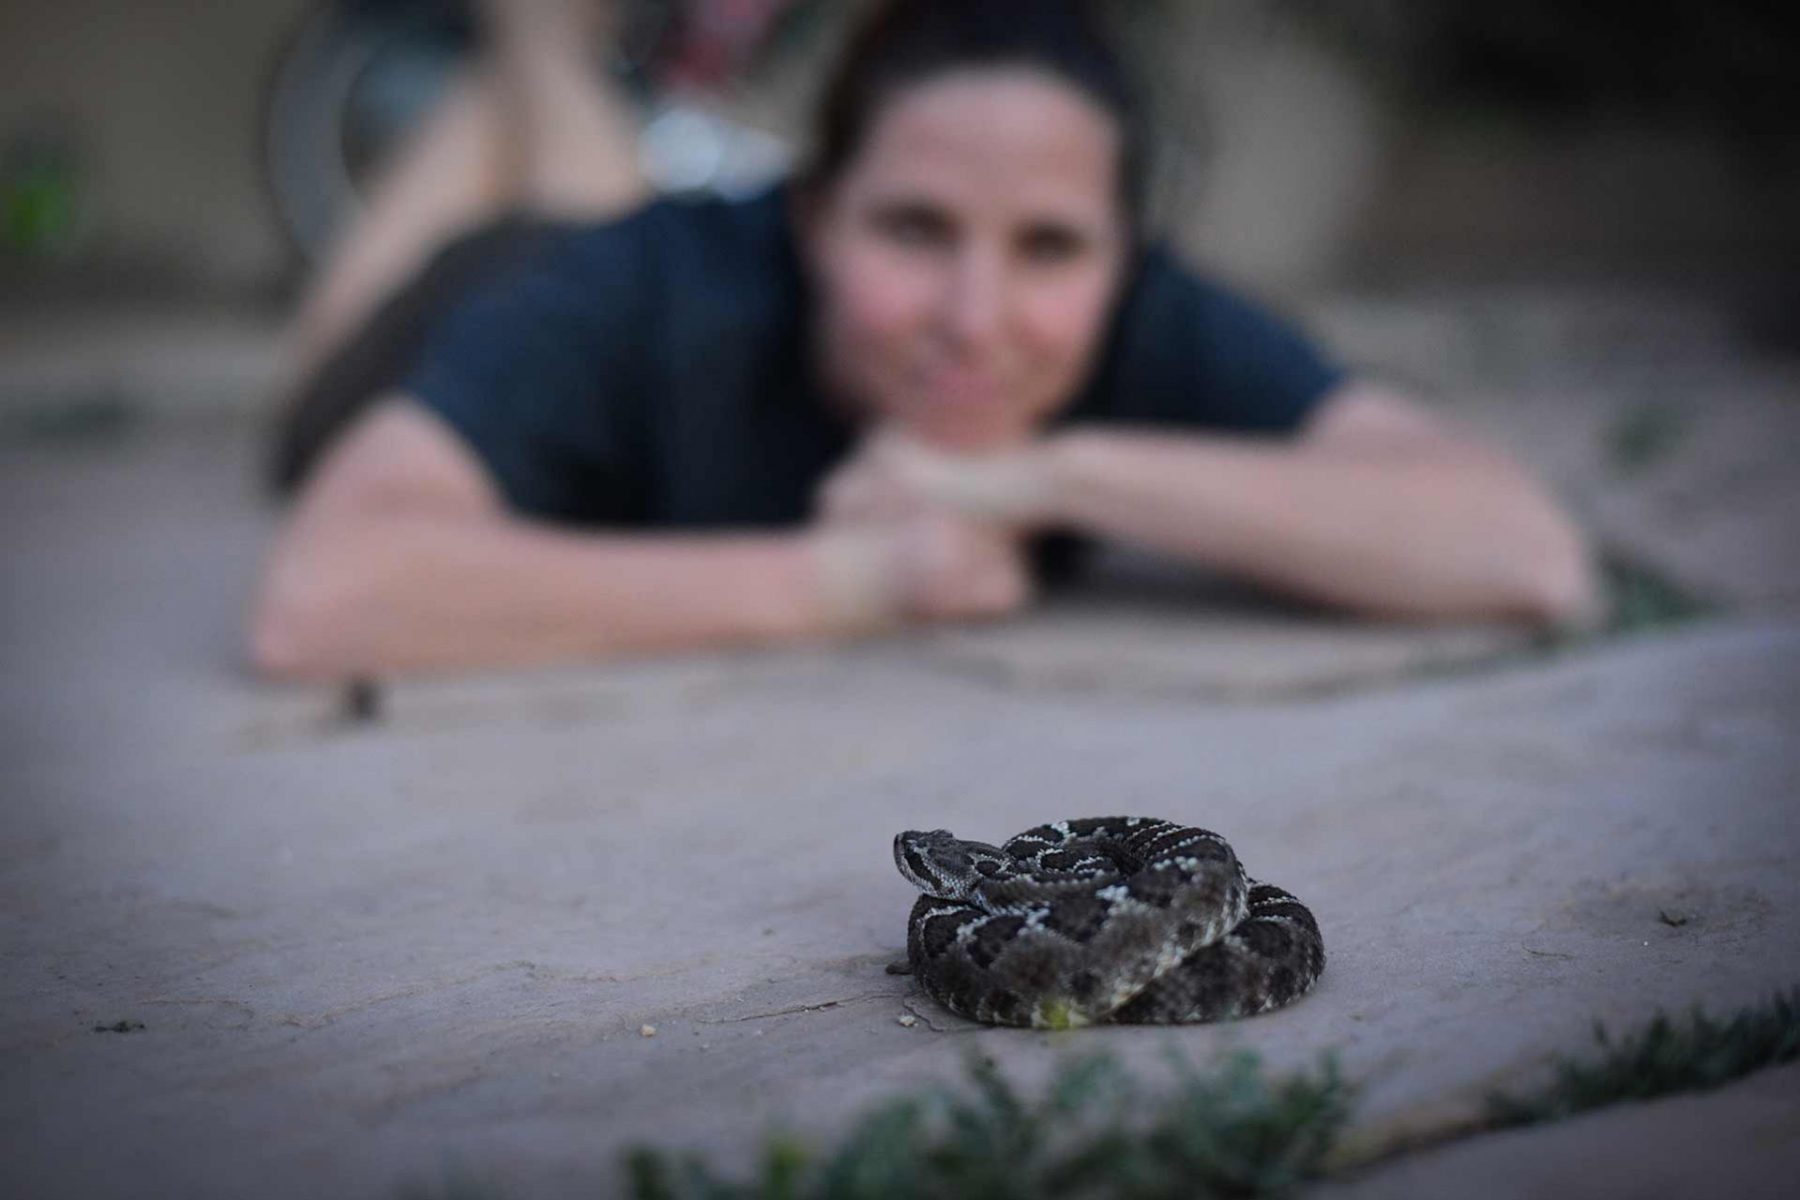 Snake advocate and co-founder of Advocates for Snake Preservation Melissa Amarello with a rescued rattlesnake named Cash. USA, 2014